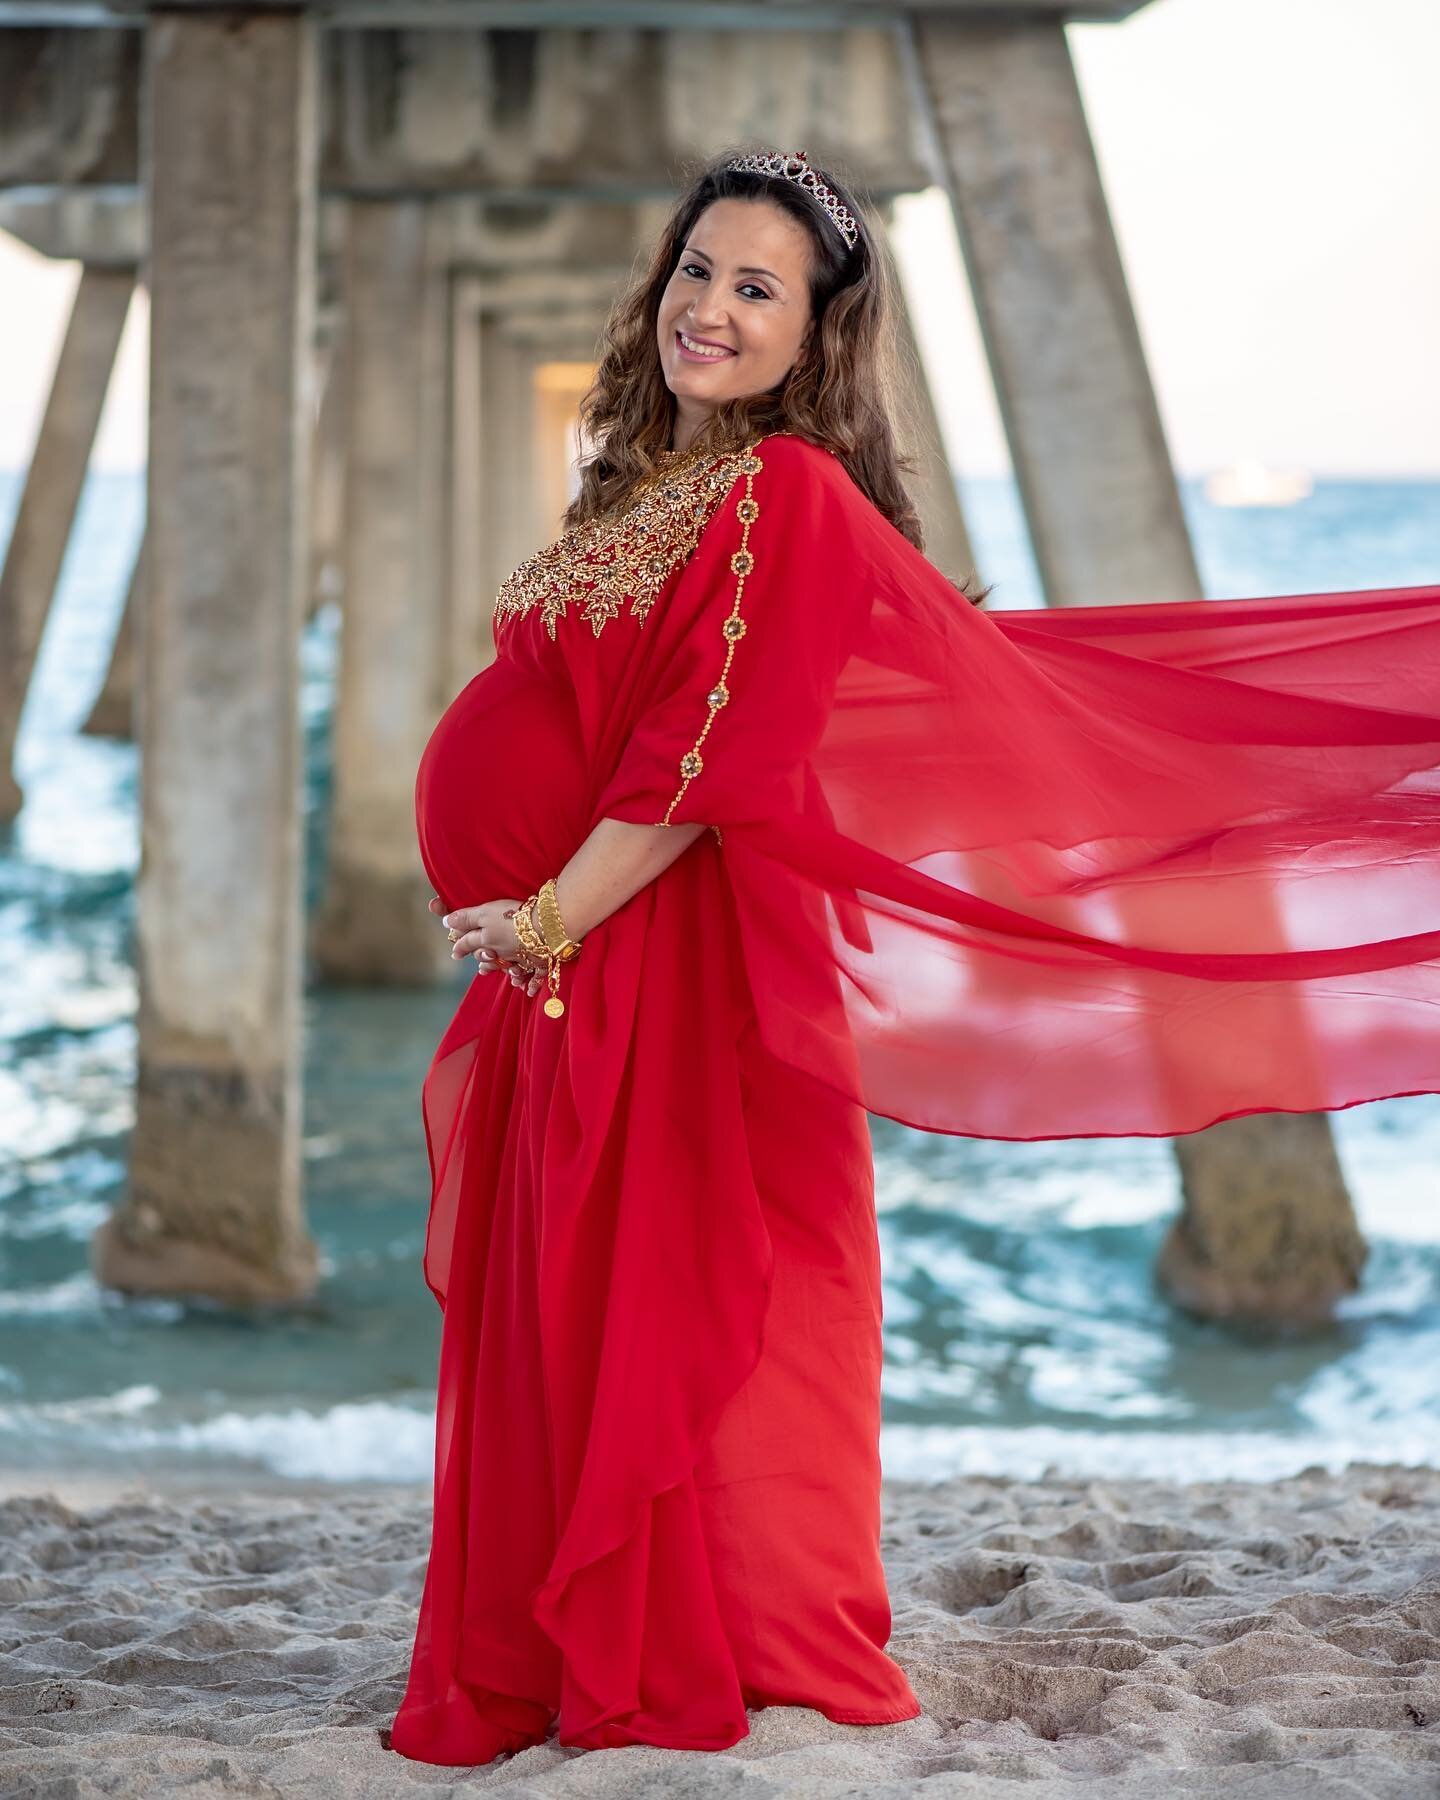 A child fills a place in your heart that you never knew was empty.

Maternity Session  1.23.21

#southflphotographer #awesomeshots #eventphotoedgraphy #eventplanning #sharpimages #southflorida #photographer #art #artist #wedding #weddingphotographer 